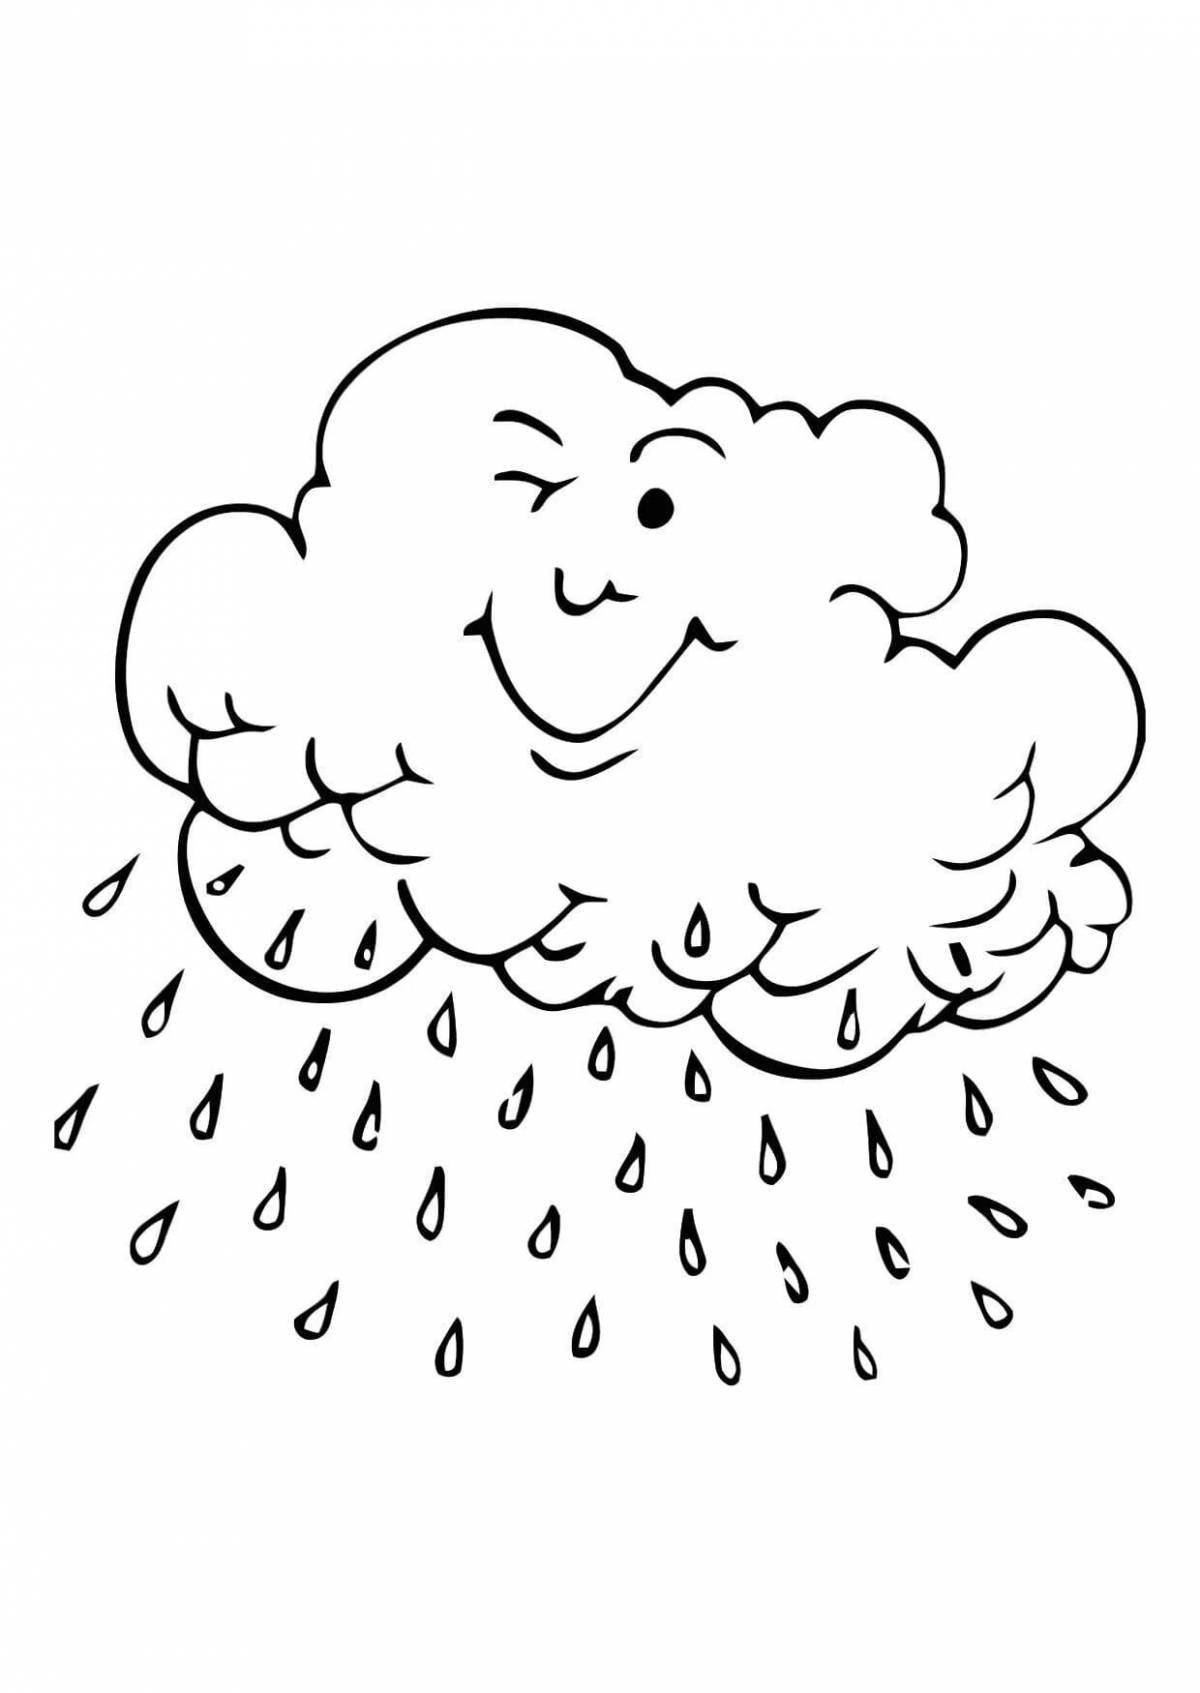 Coloring page blissful rain for kids